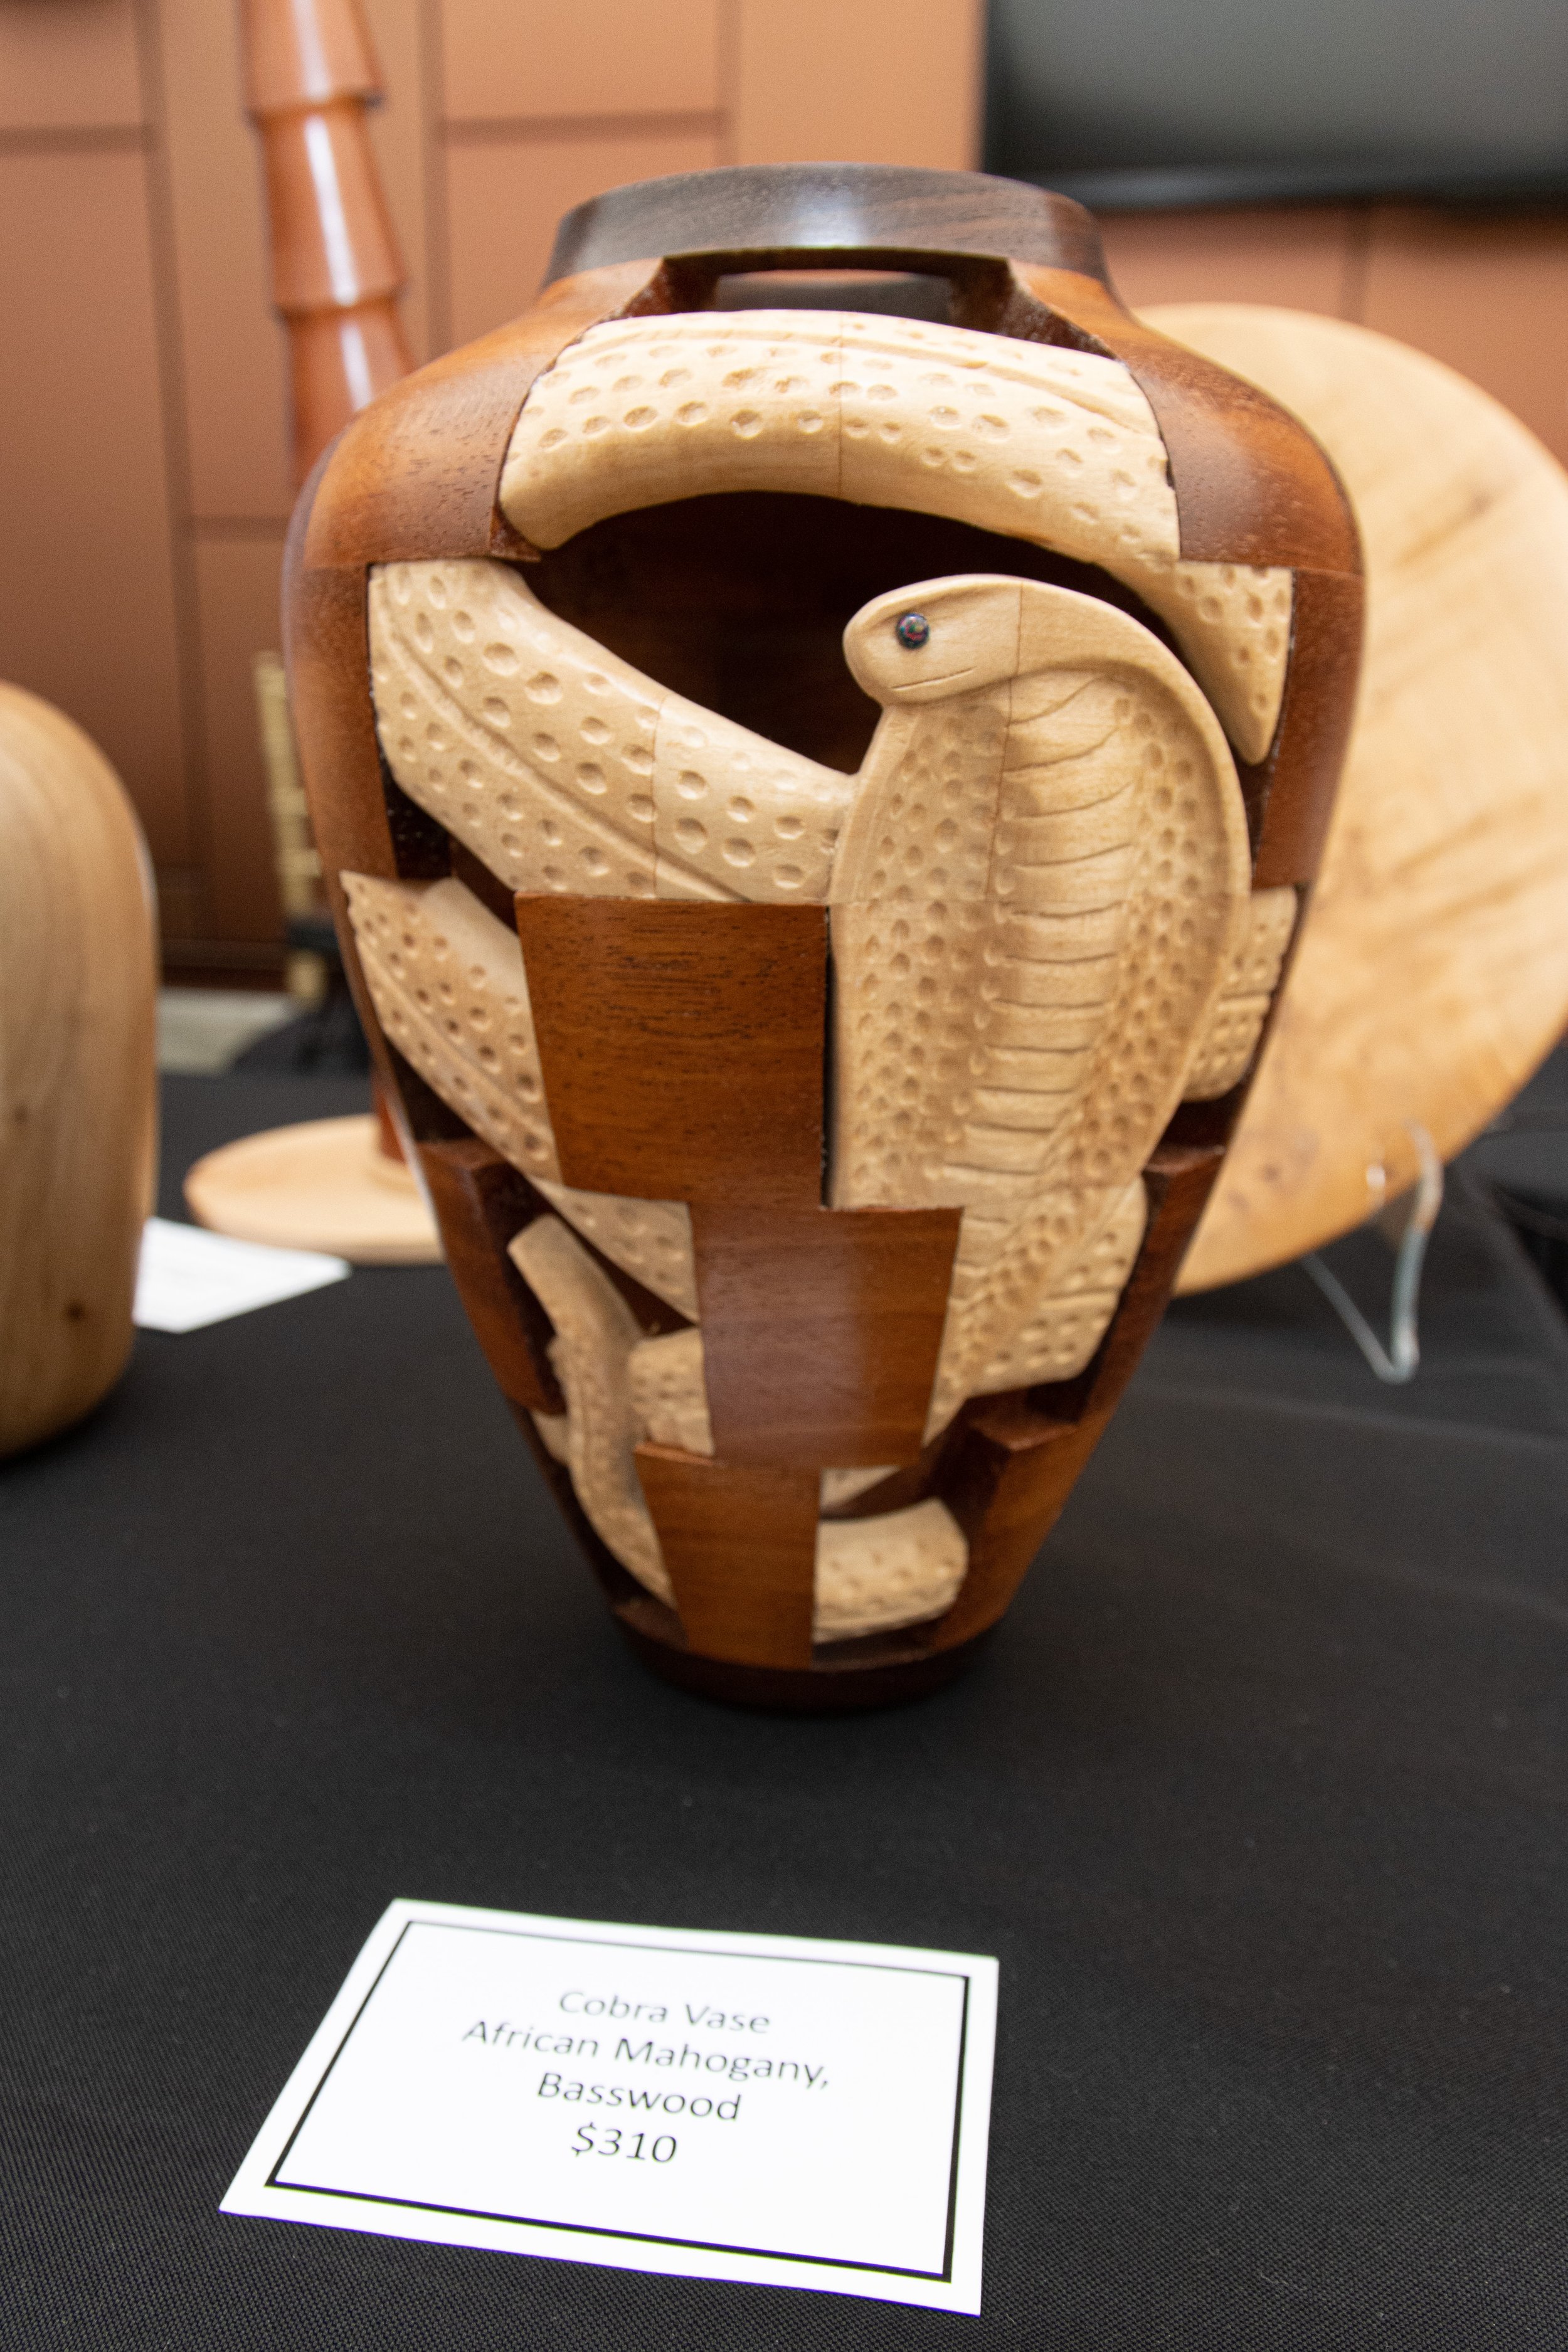 Cobra Vase made of African mahogany and basswood